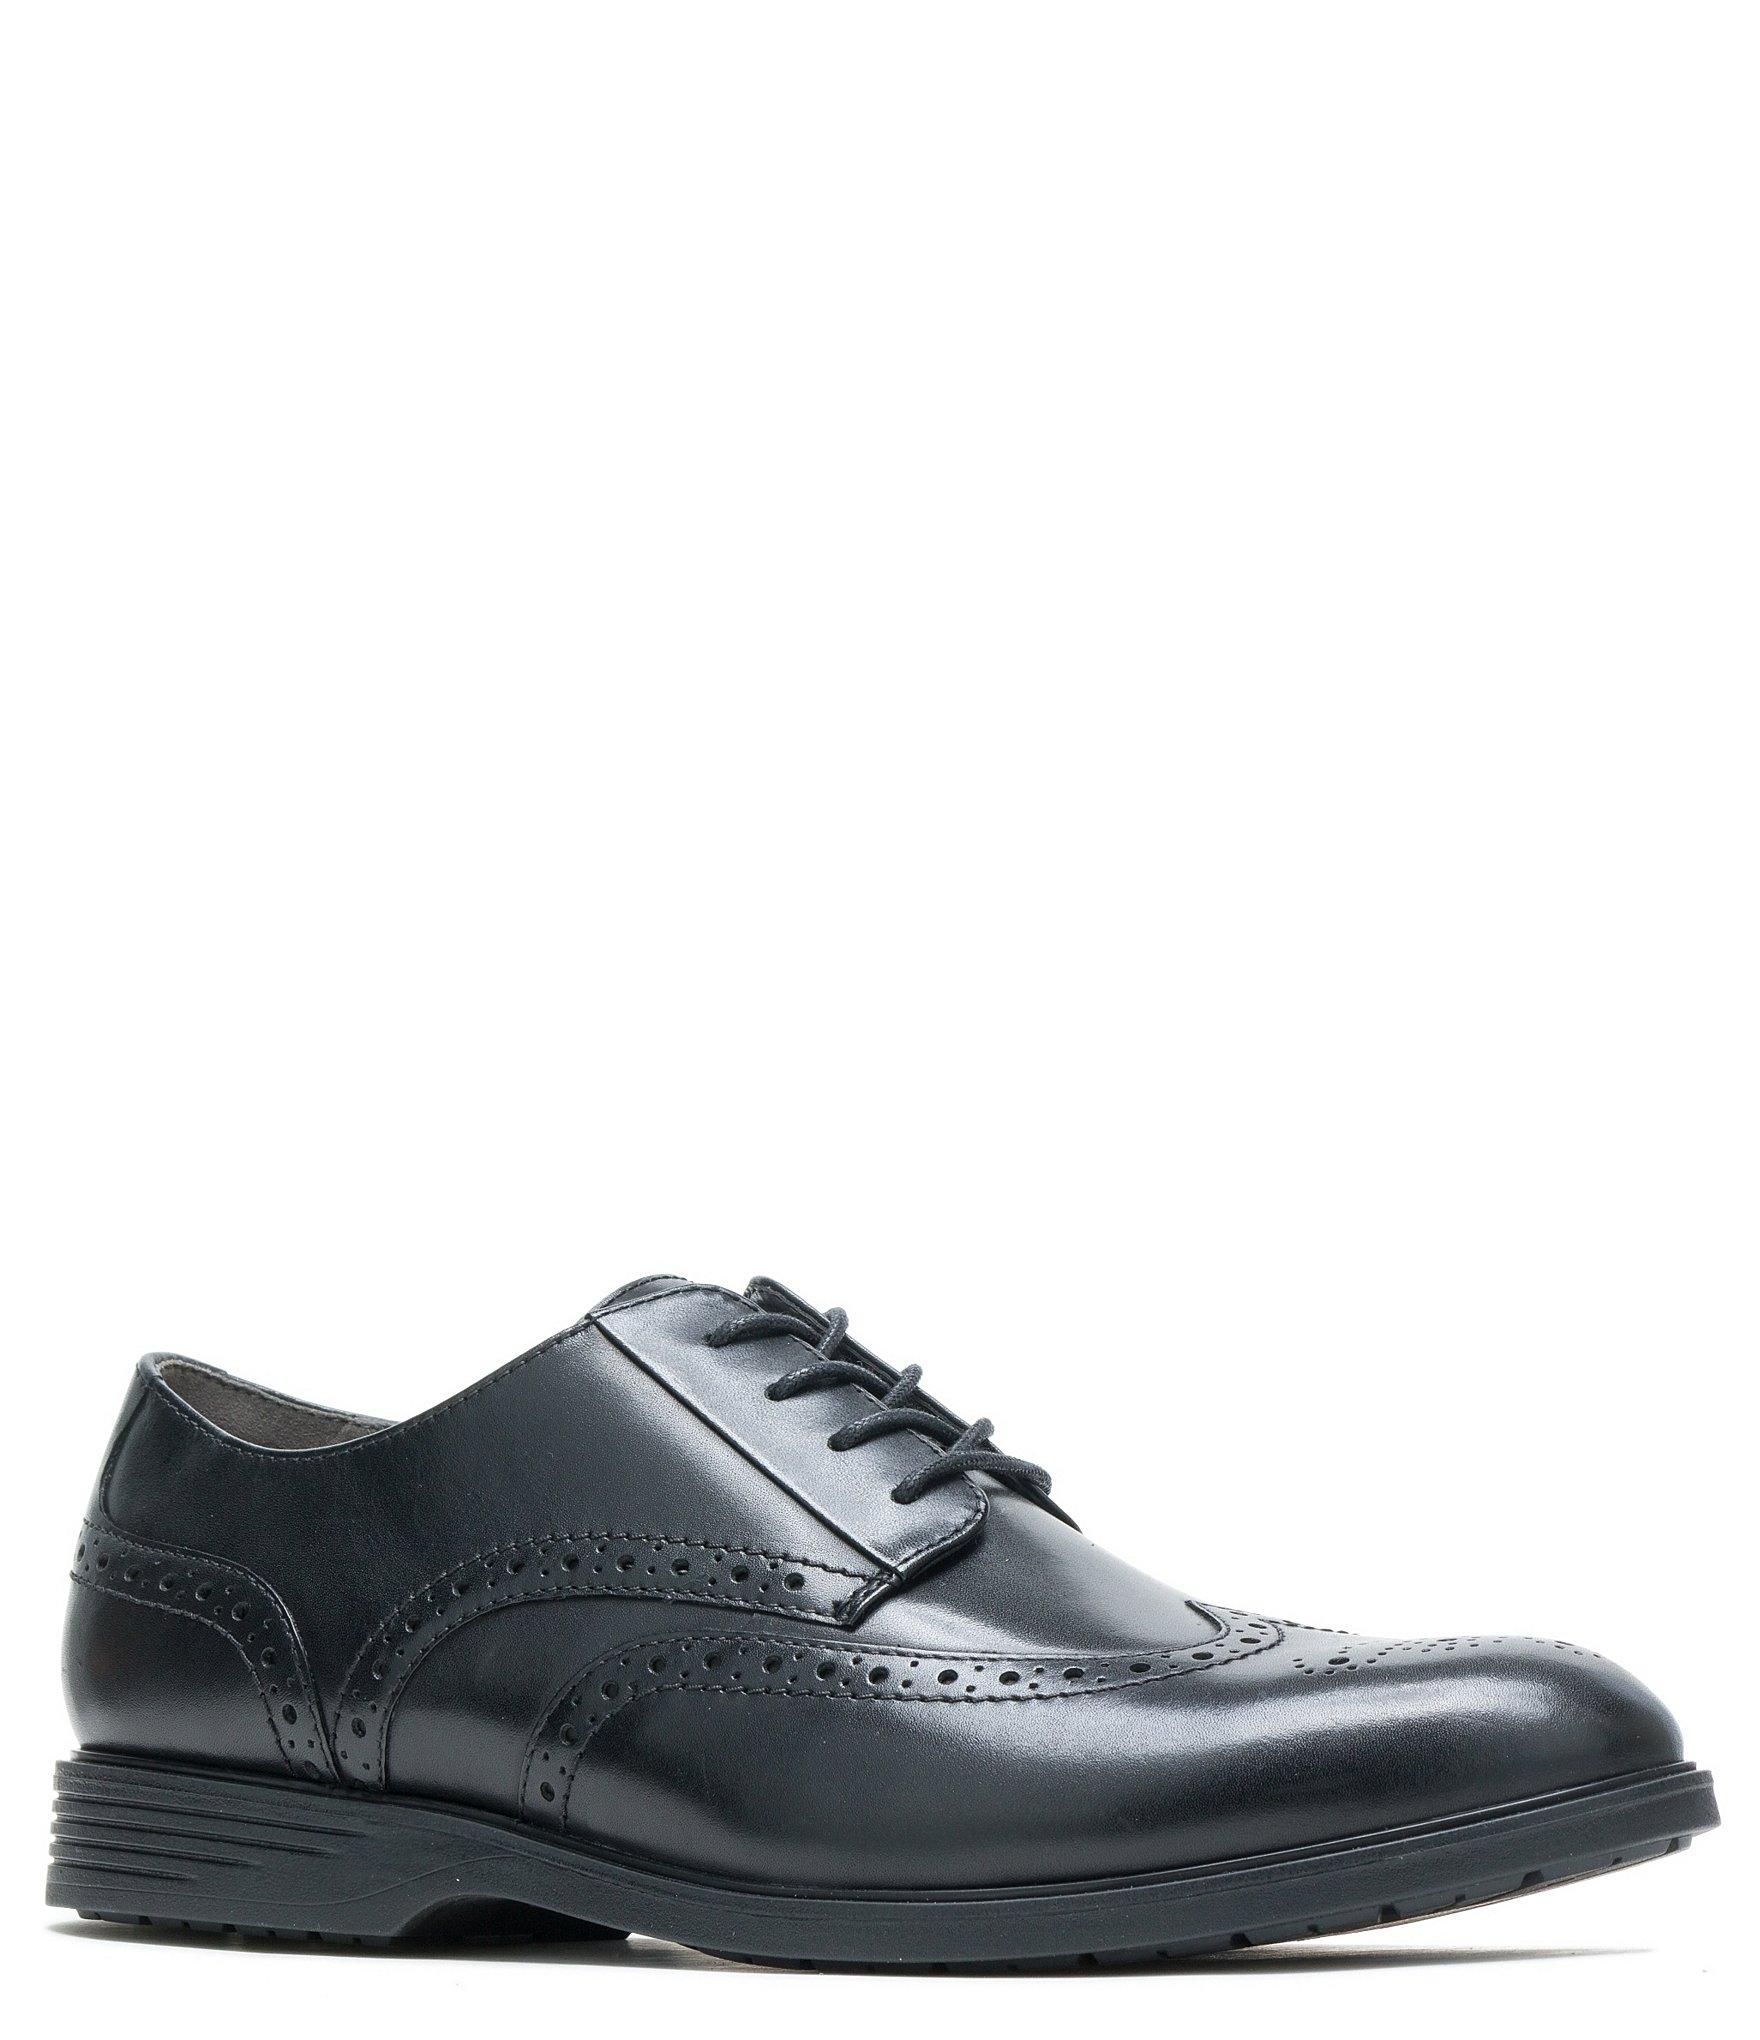 Hush Puppies Rubber Shepsky Wingtip Oxford in Black for Men - Save 15% ...